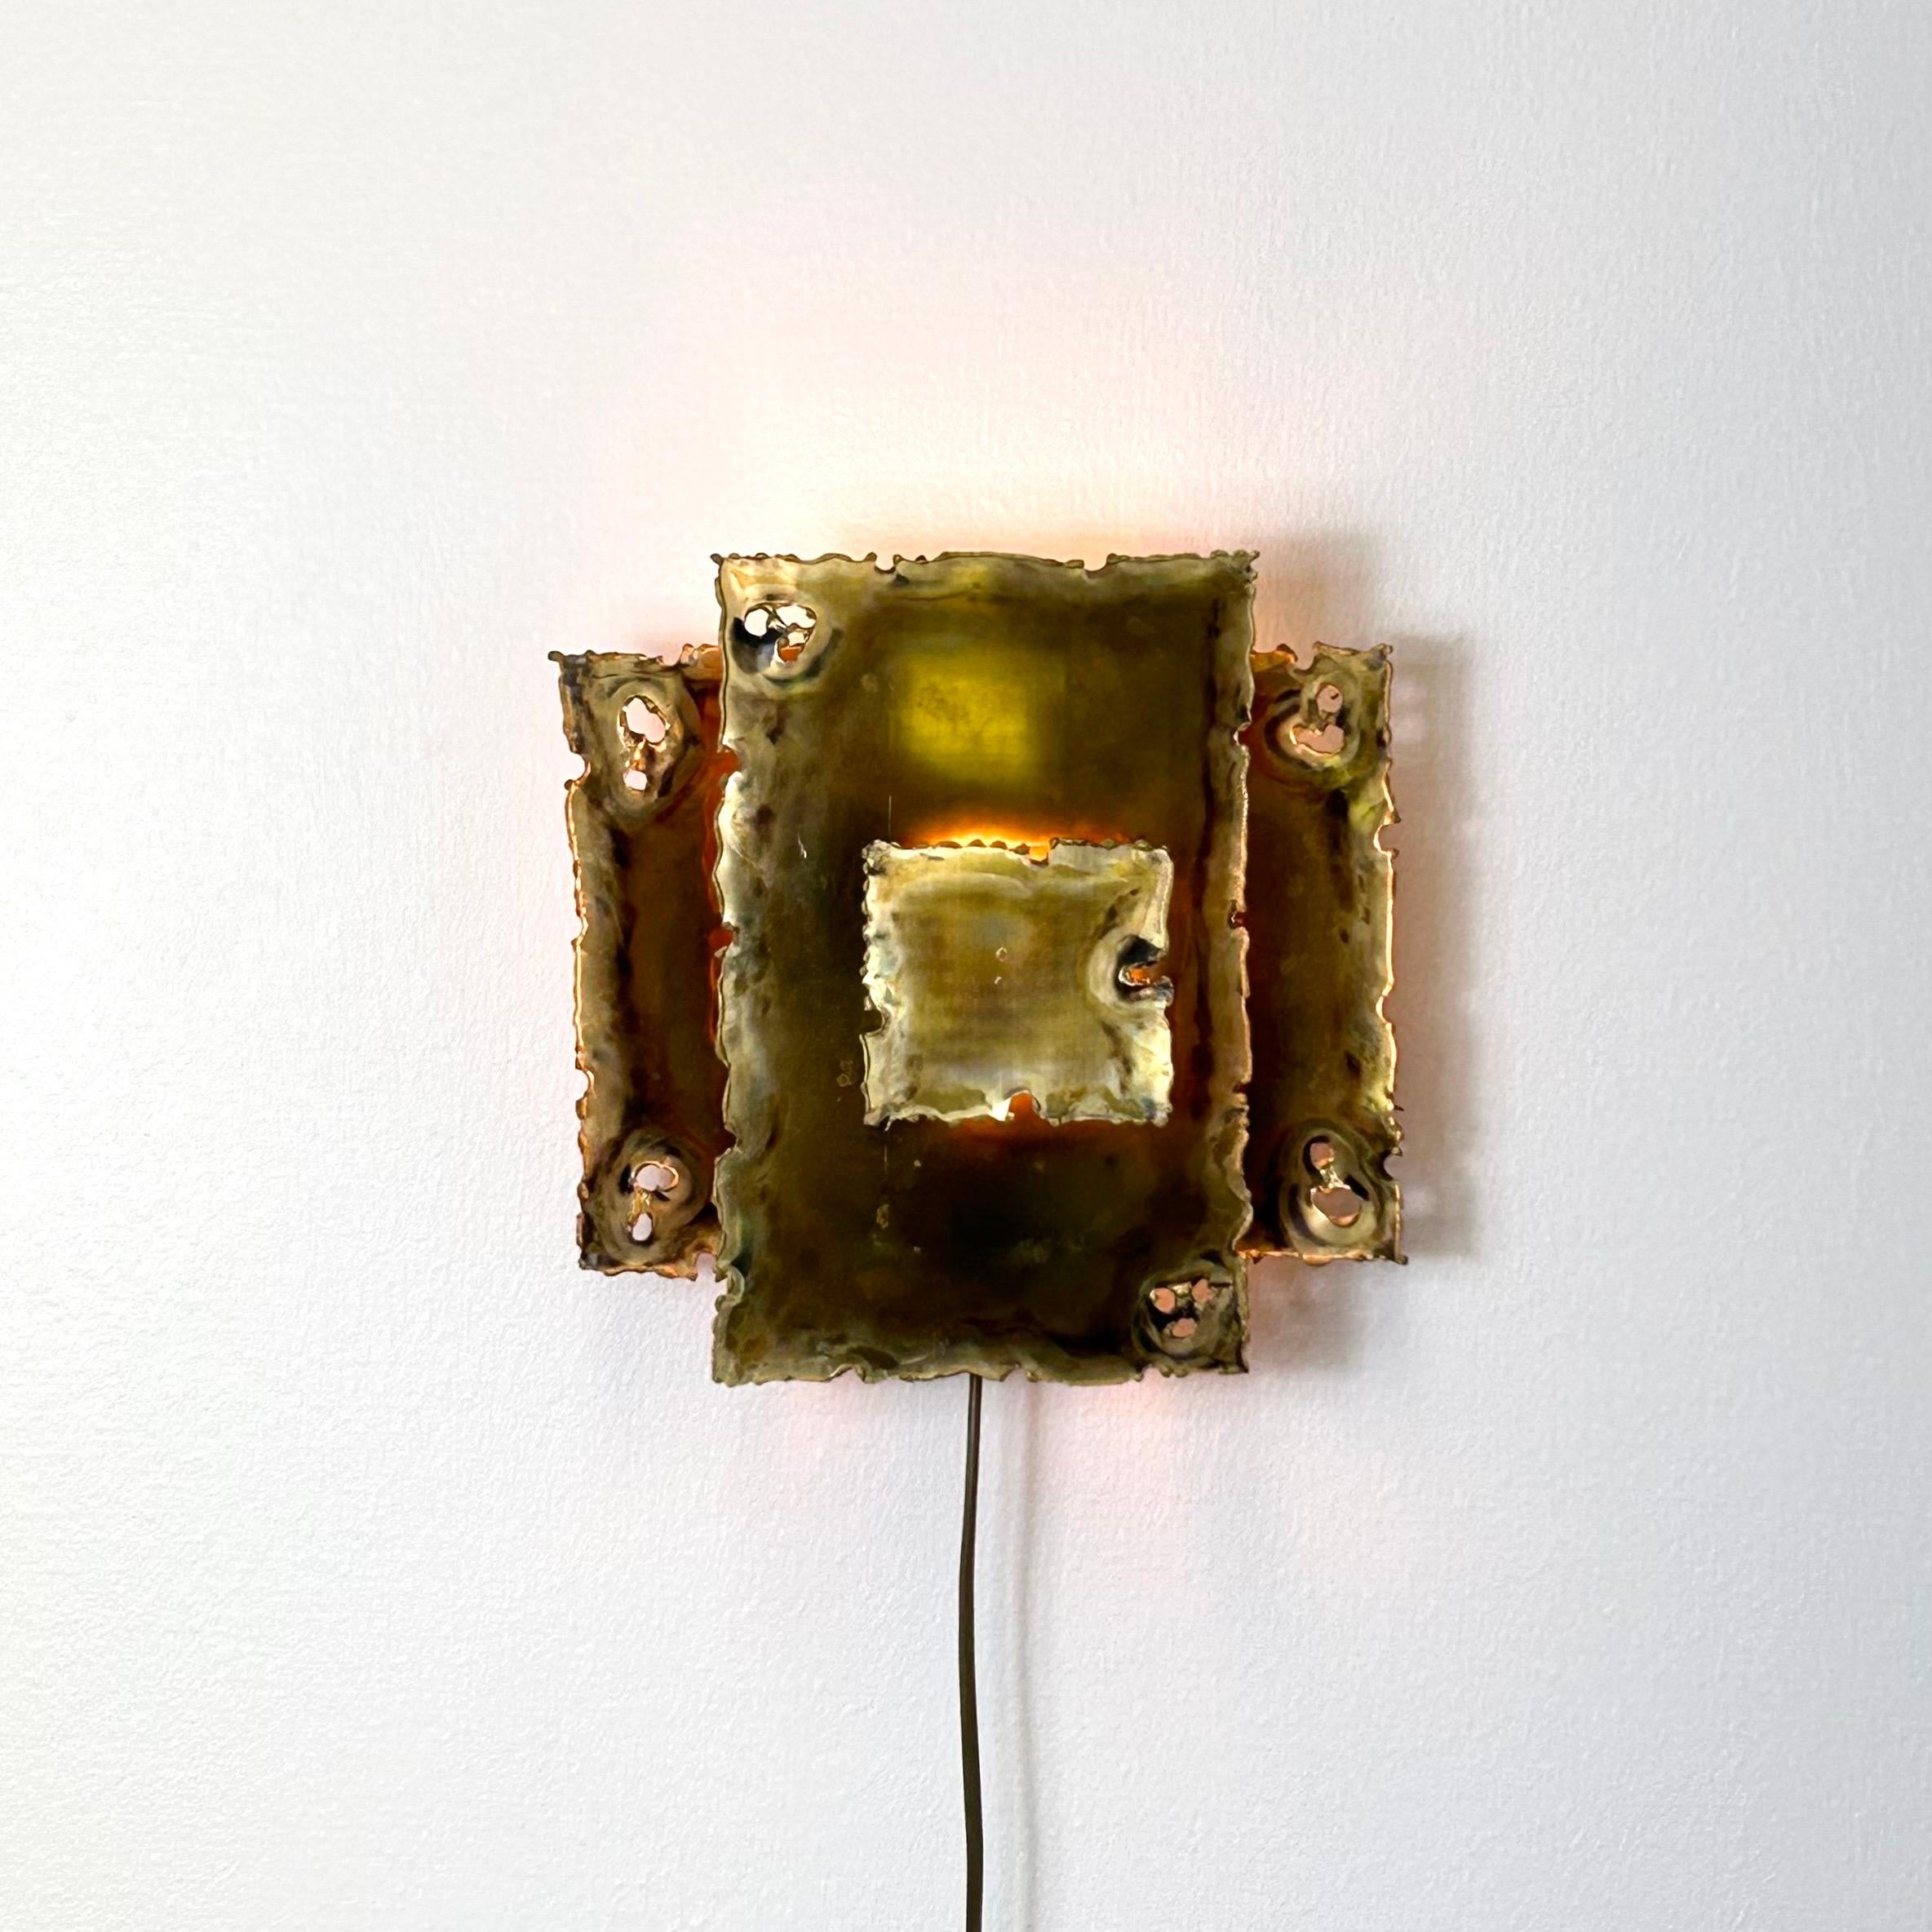 Brutalist A Square Brass Wall Lamp by Svend Aage Holm Sorensen, 1960s, Denmark For Sale